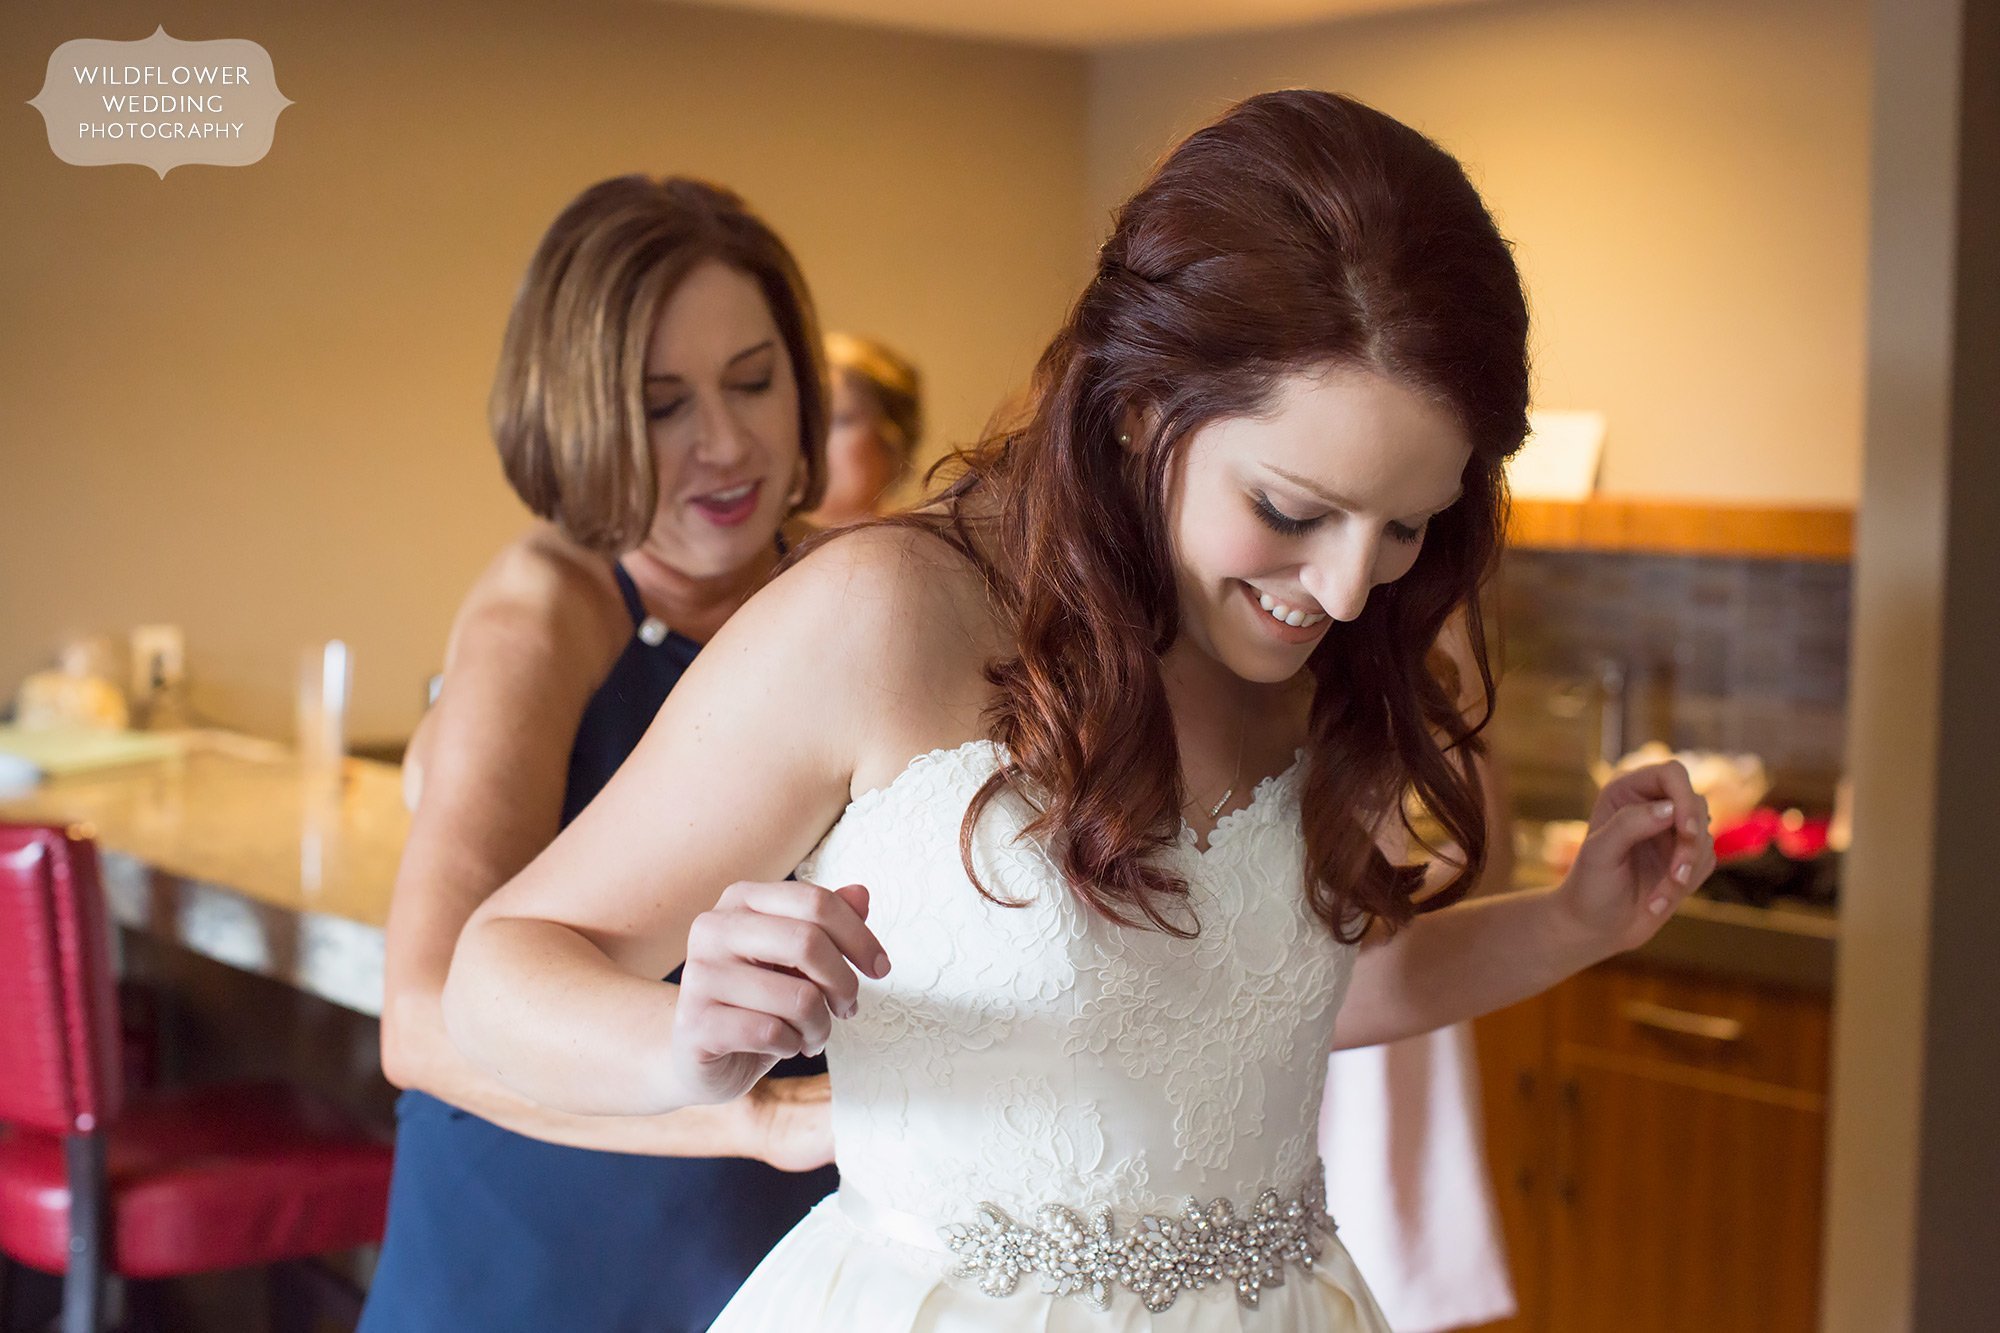 Emotional photojournalism style wedding photo of the bride putting her dress on before her summer outdoor wedding in Columbia, MO.